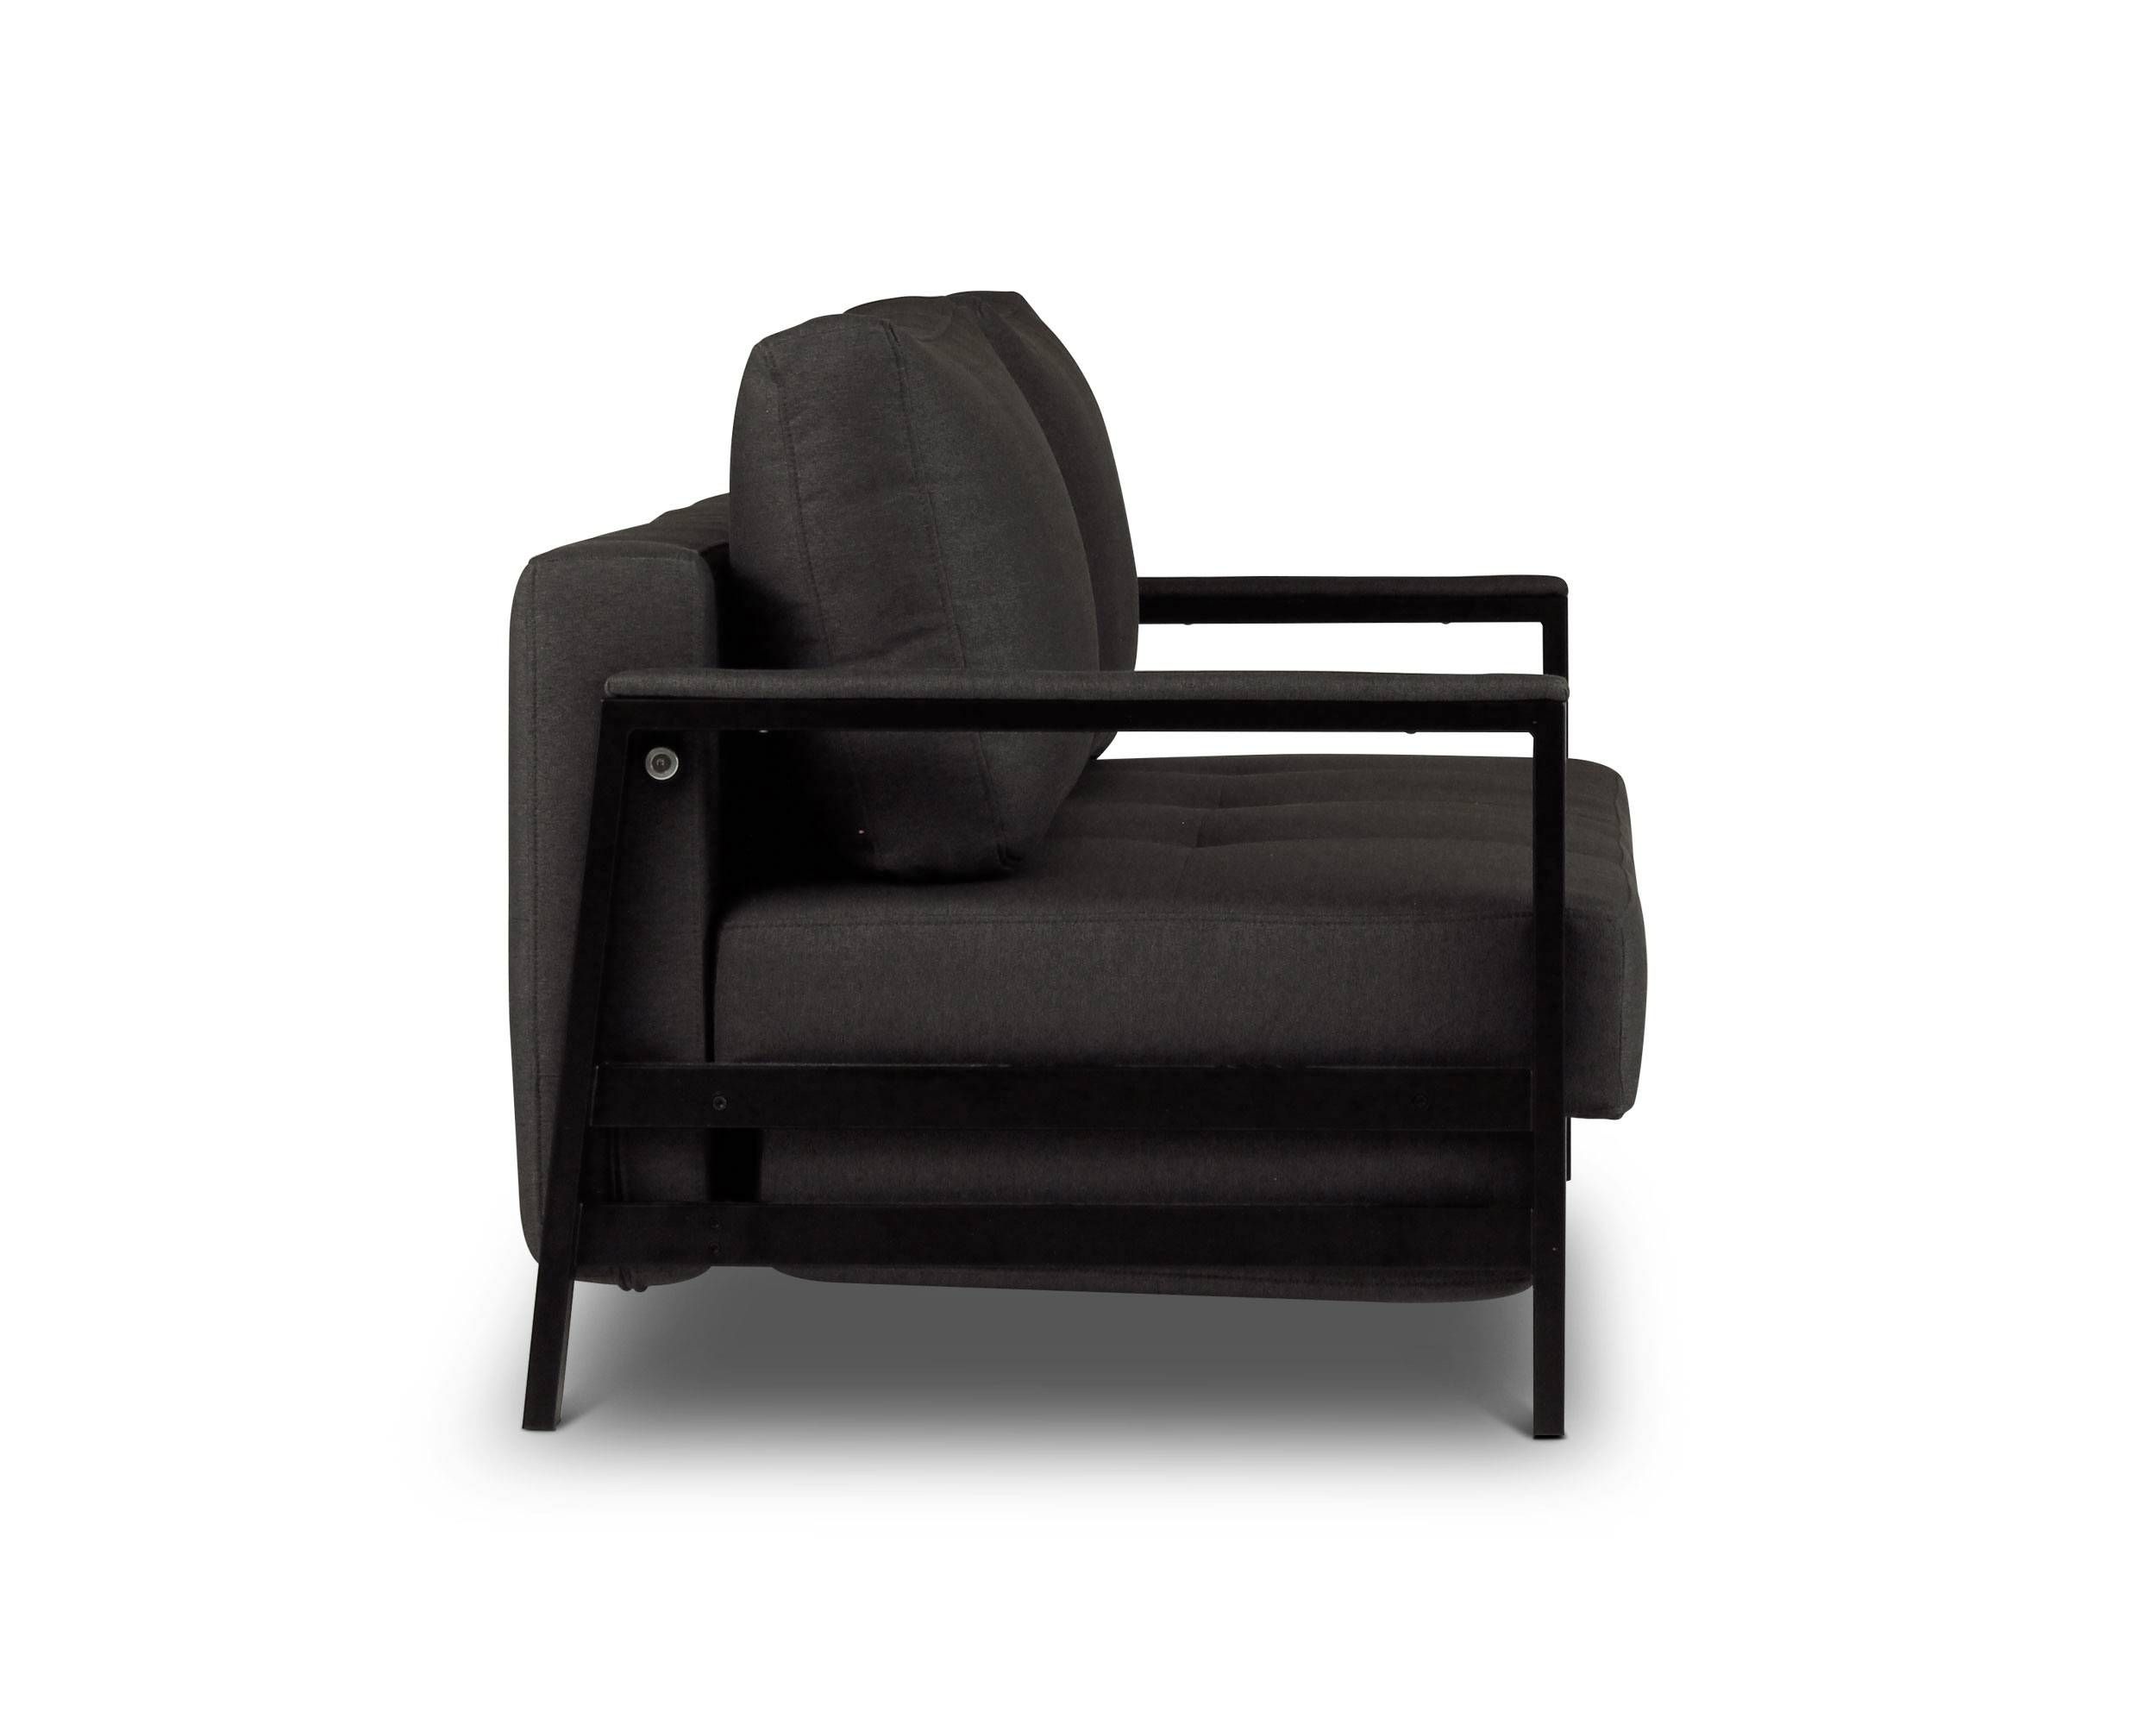 Kobe – 2 Seat Sofa Bed | Loungelovers Within Black 2 Seater Sofas (View 7 of 30)